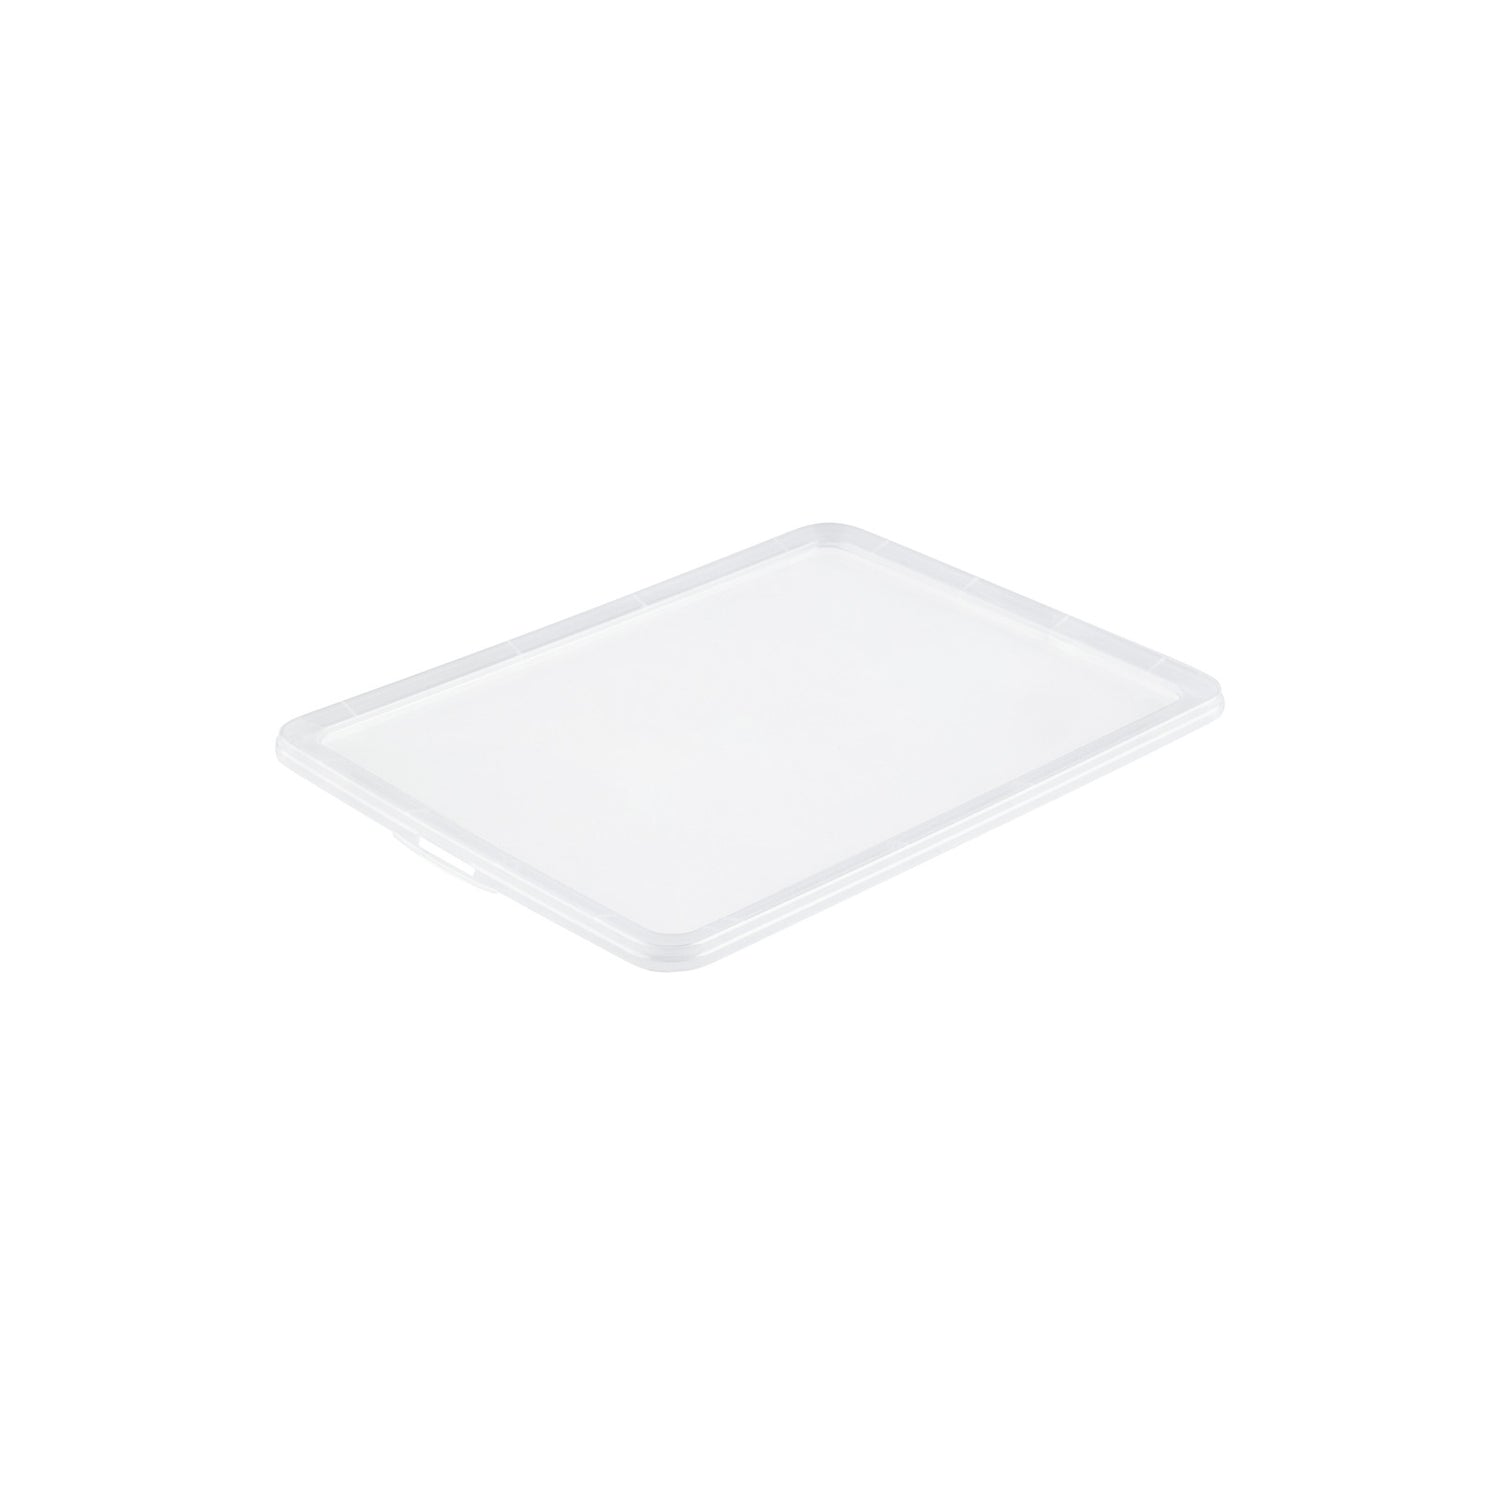 Replacement Lid for Men's Shoe Box 10 l CLEAR